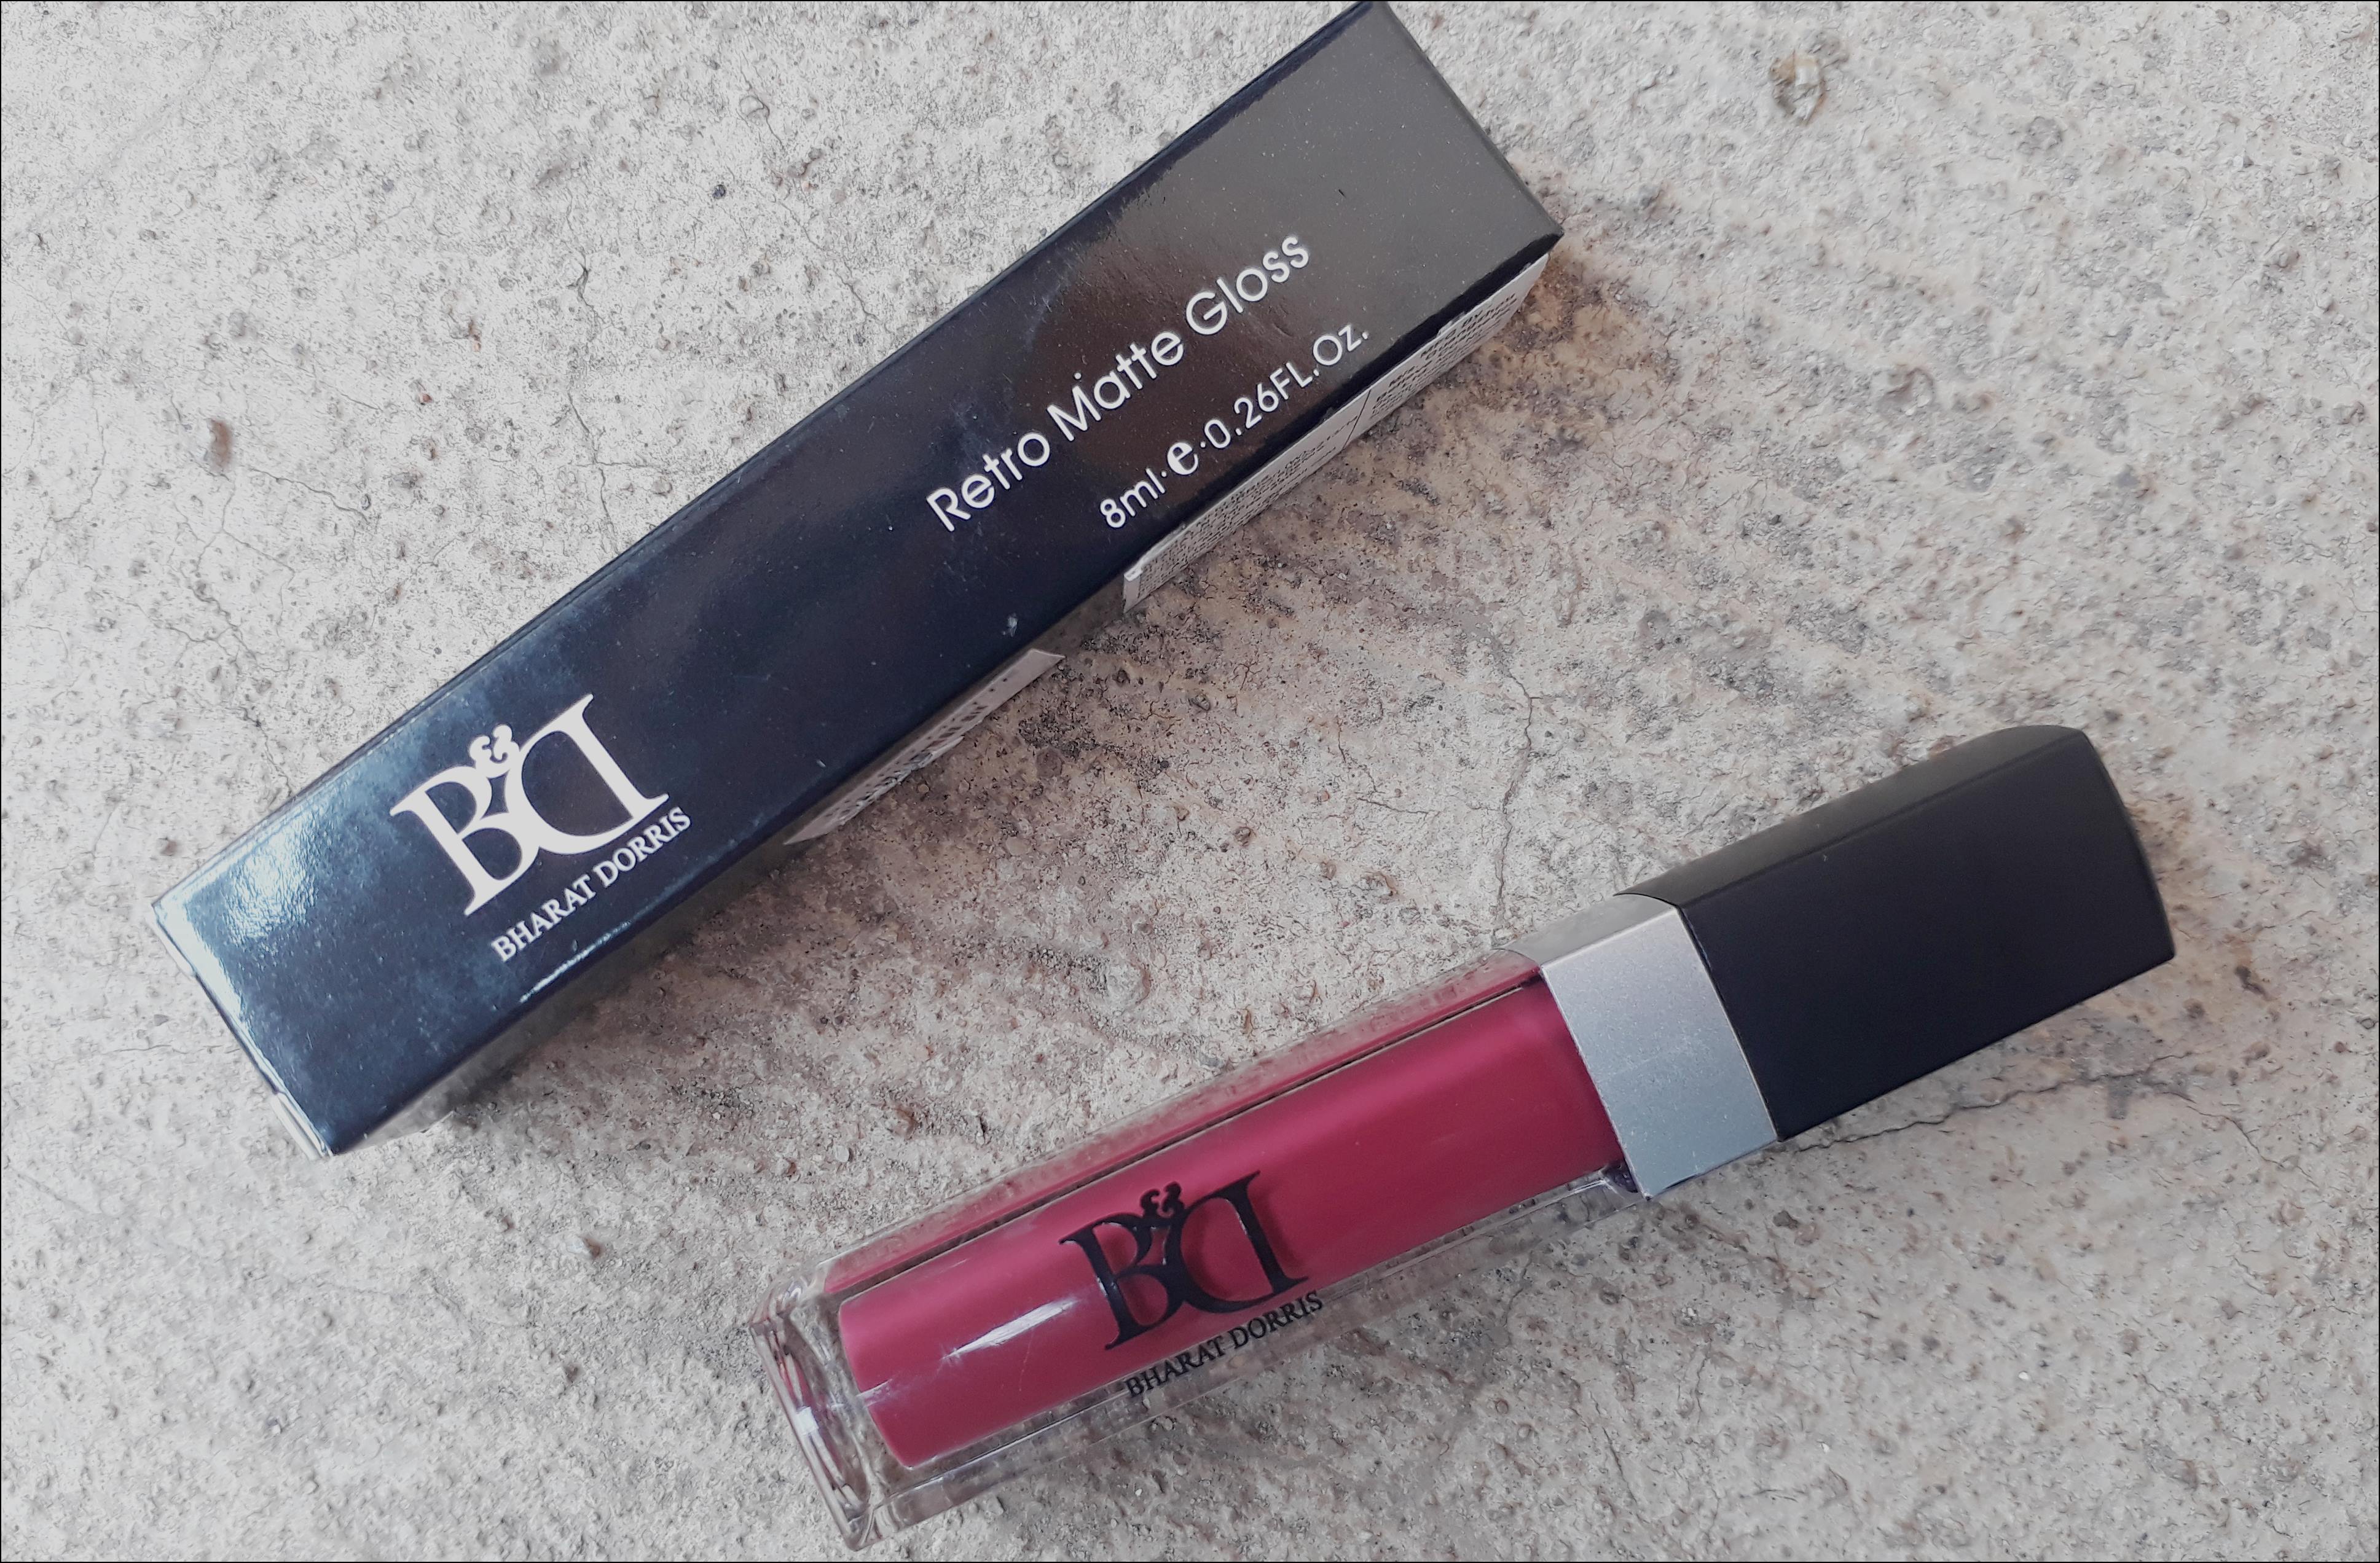 Bharath and Doris Retro matte gloss 10 : Do not buy this and I’ll tell you all why!!!